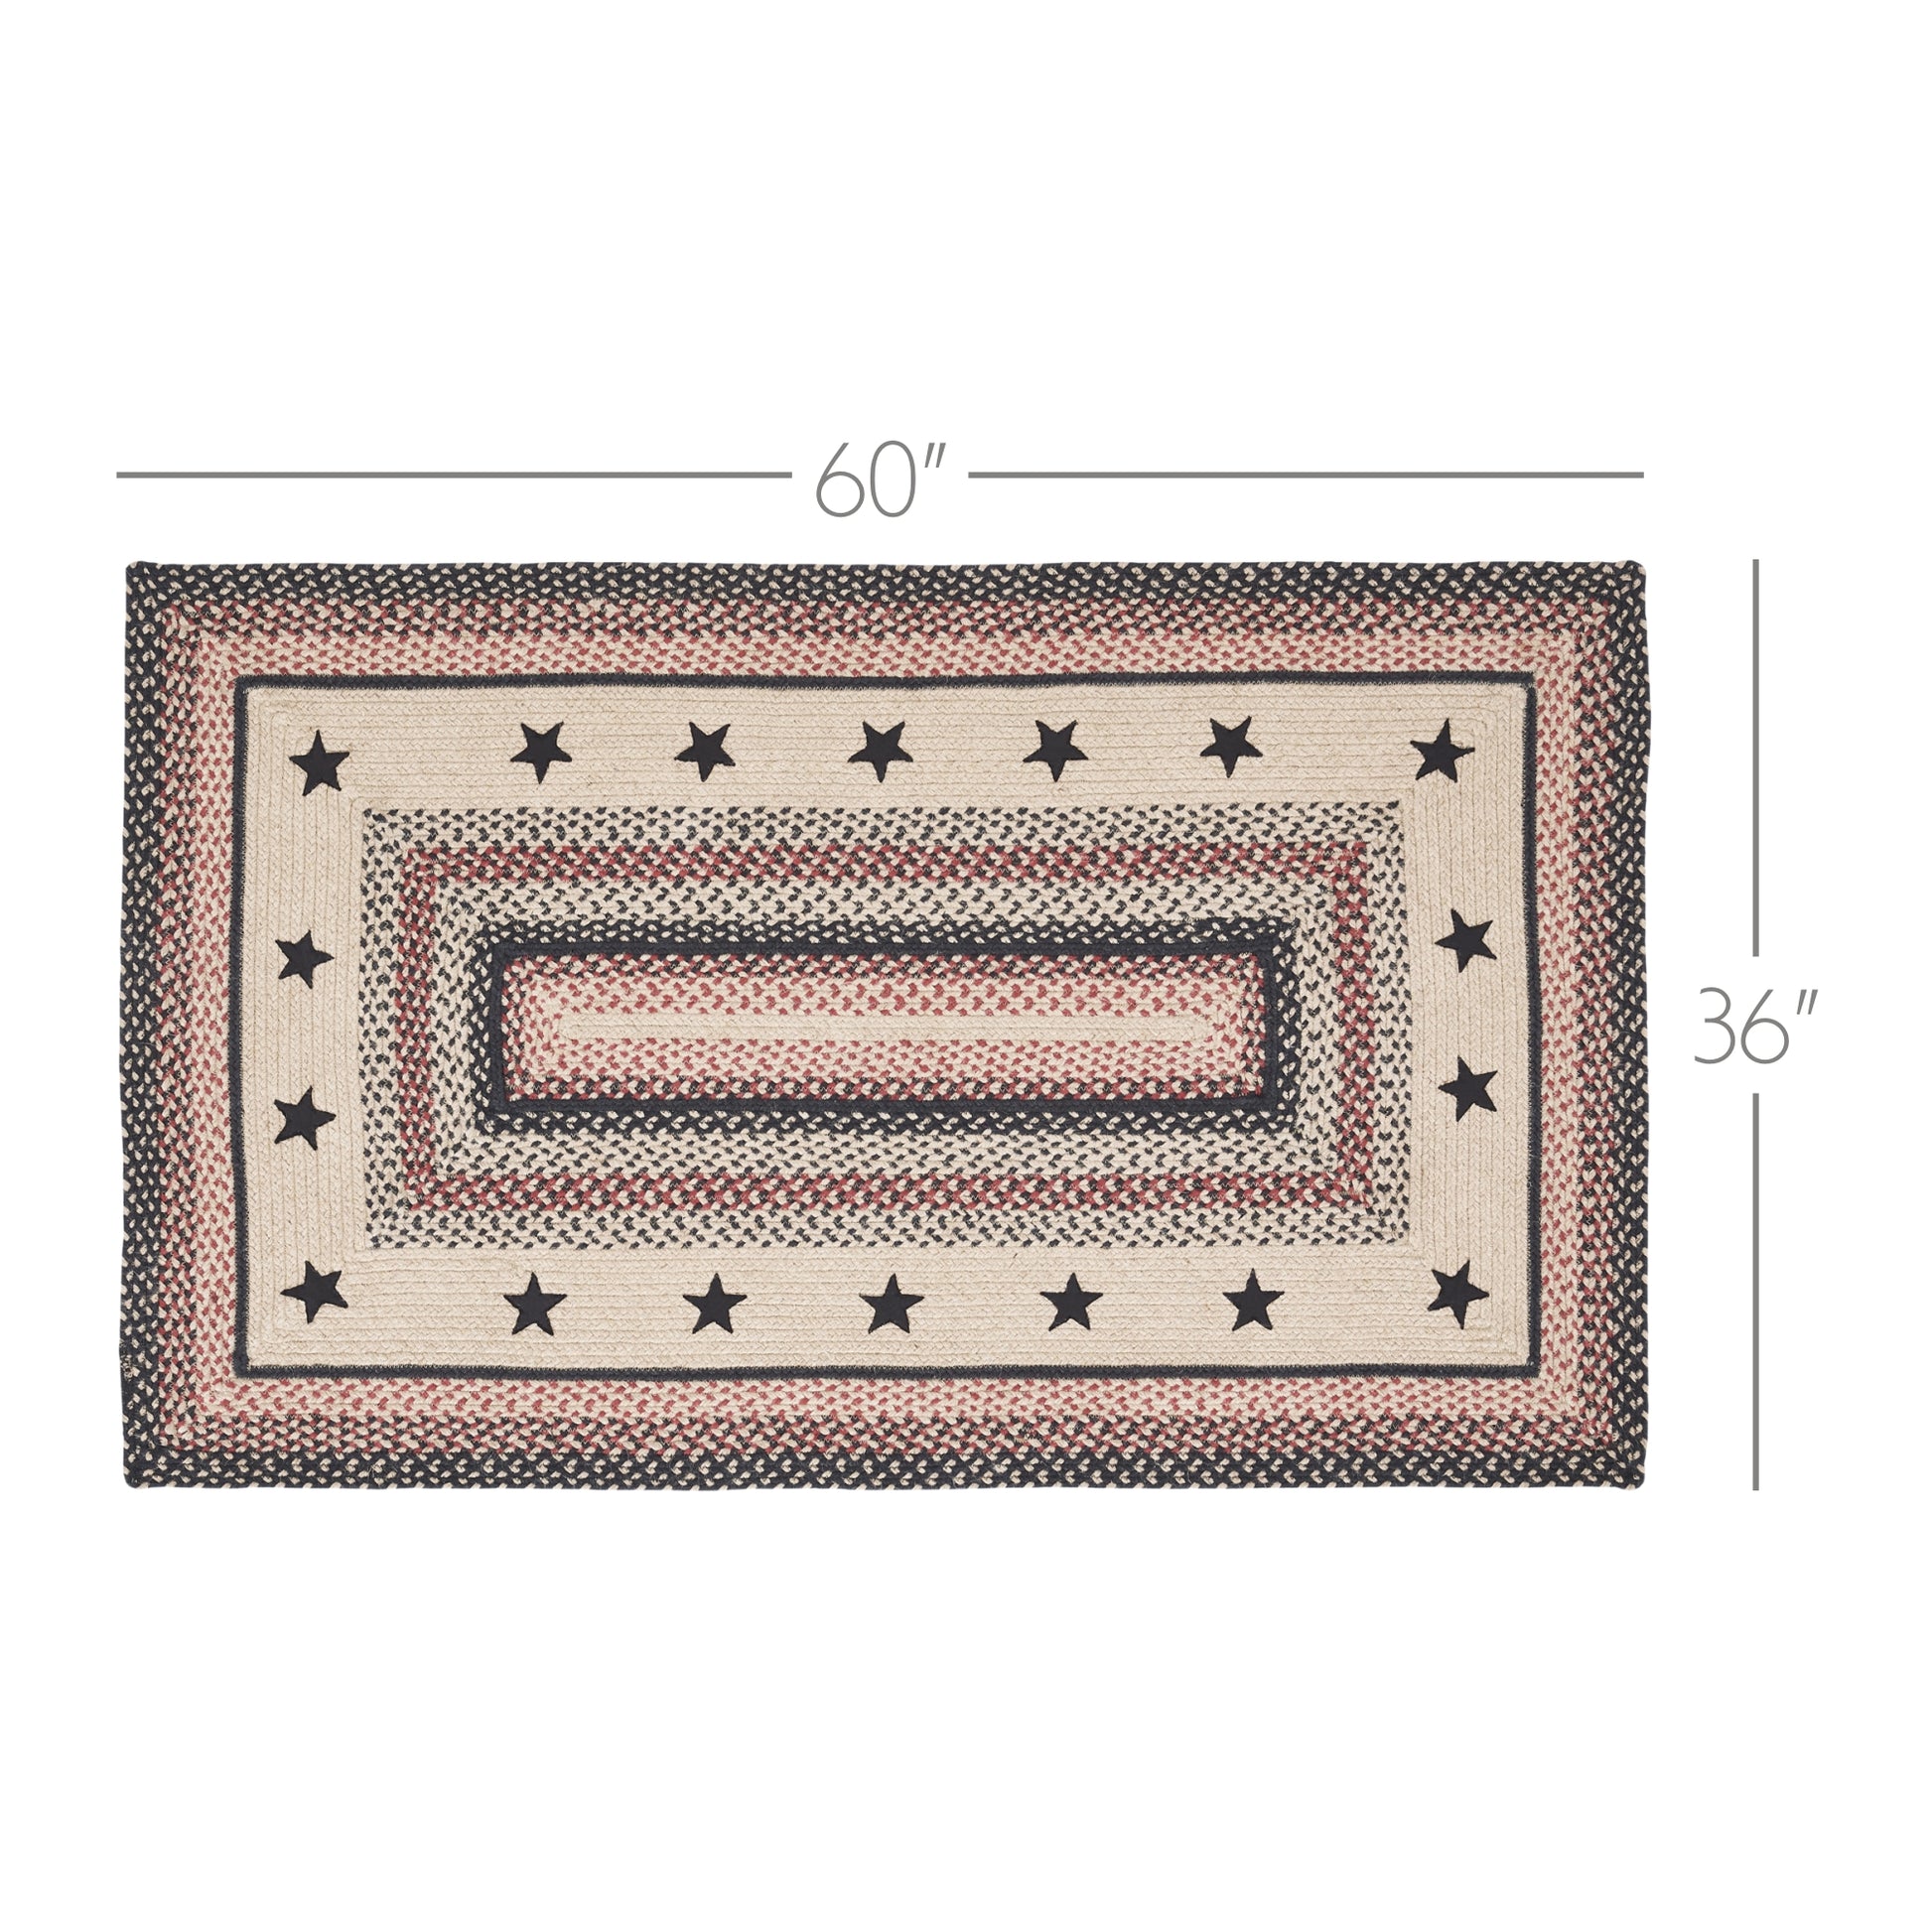 81335-Colonial-Star-Jute-Rug-Rect-w-Pad-36x60-image-1